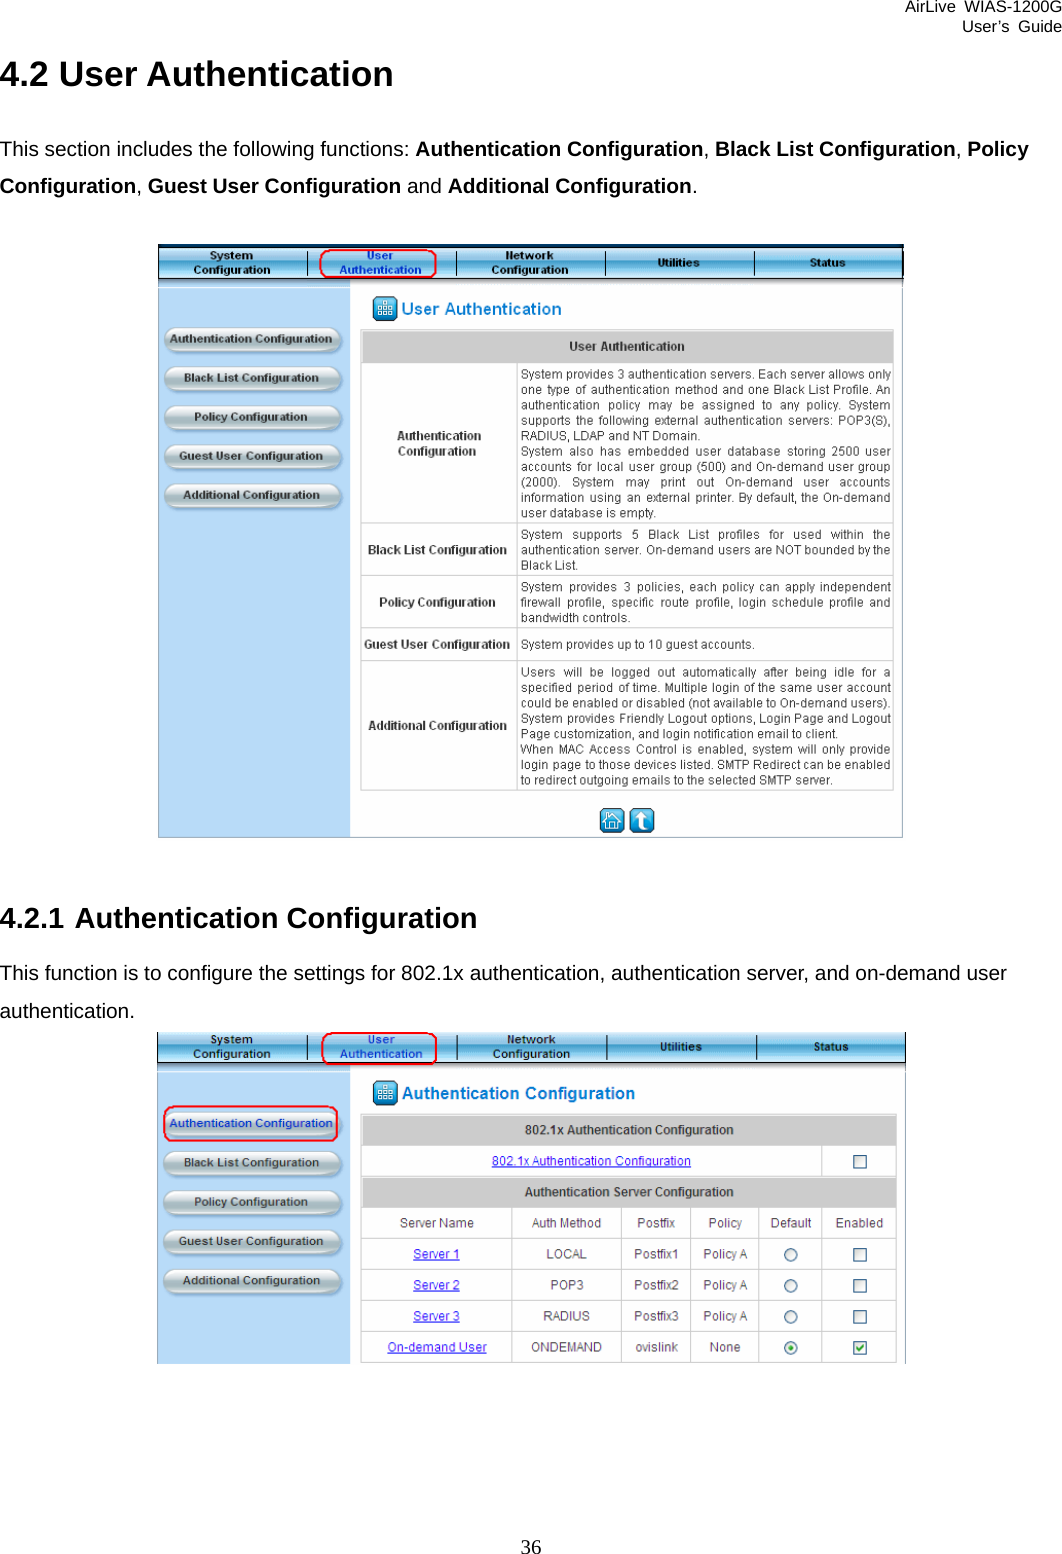 AirLive WIAS-1200G User’s Guide 36 4.2 User Authentication This section includes the following functions: Authentication Configuration, Black List Configuration, Policy Configuration, Guest User Configuration and Additional Configuration.    4.2.1 Authentication Configuration This function is to configure the settings for 802.1x authentication, authentication server, and on-demand user authentication.  